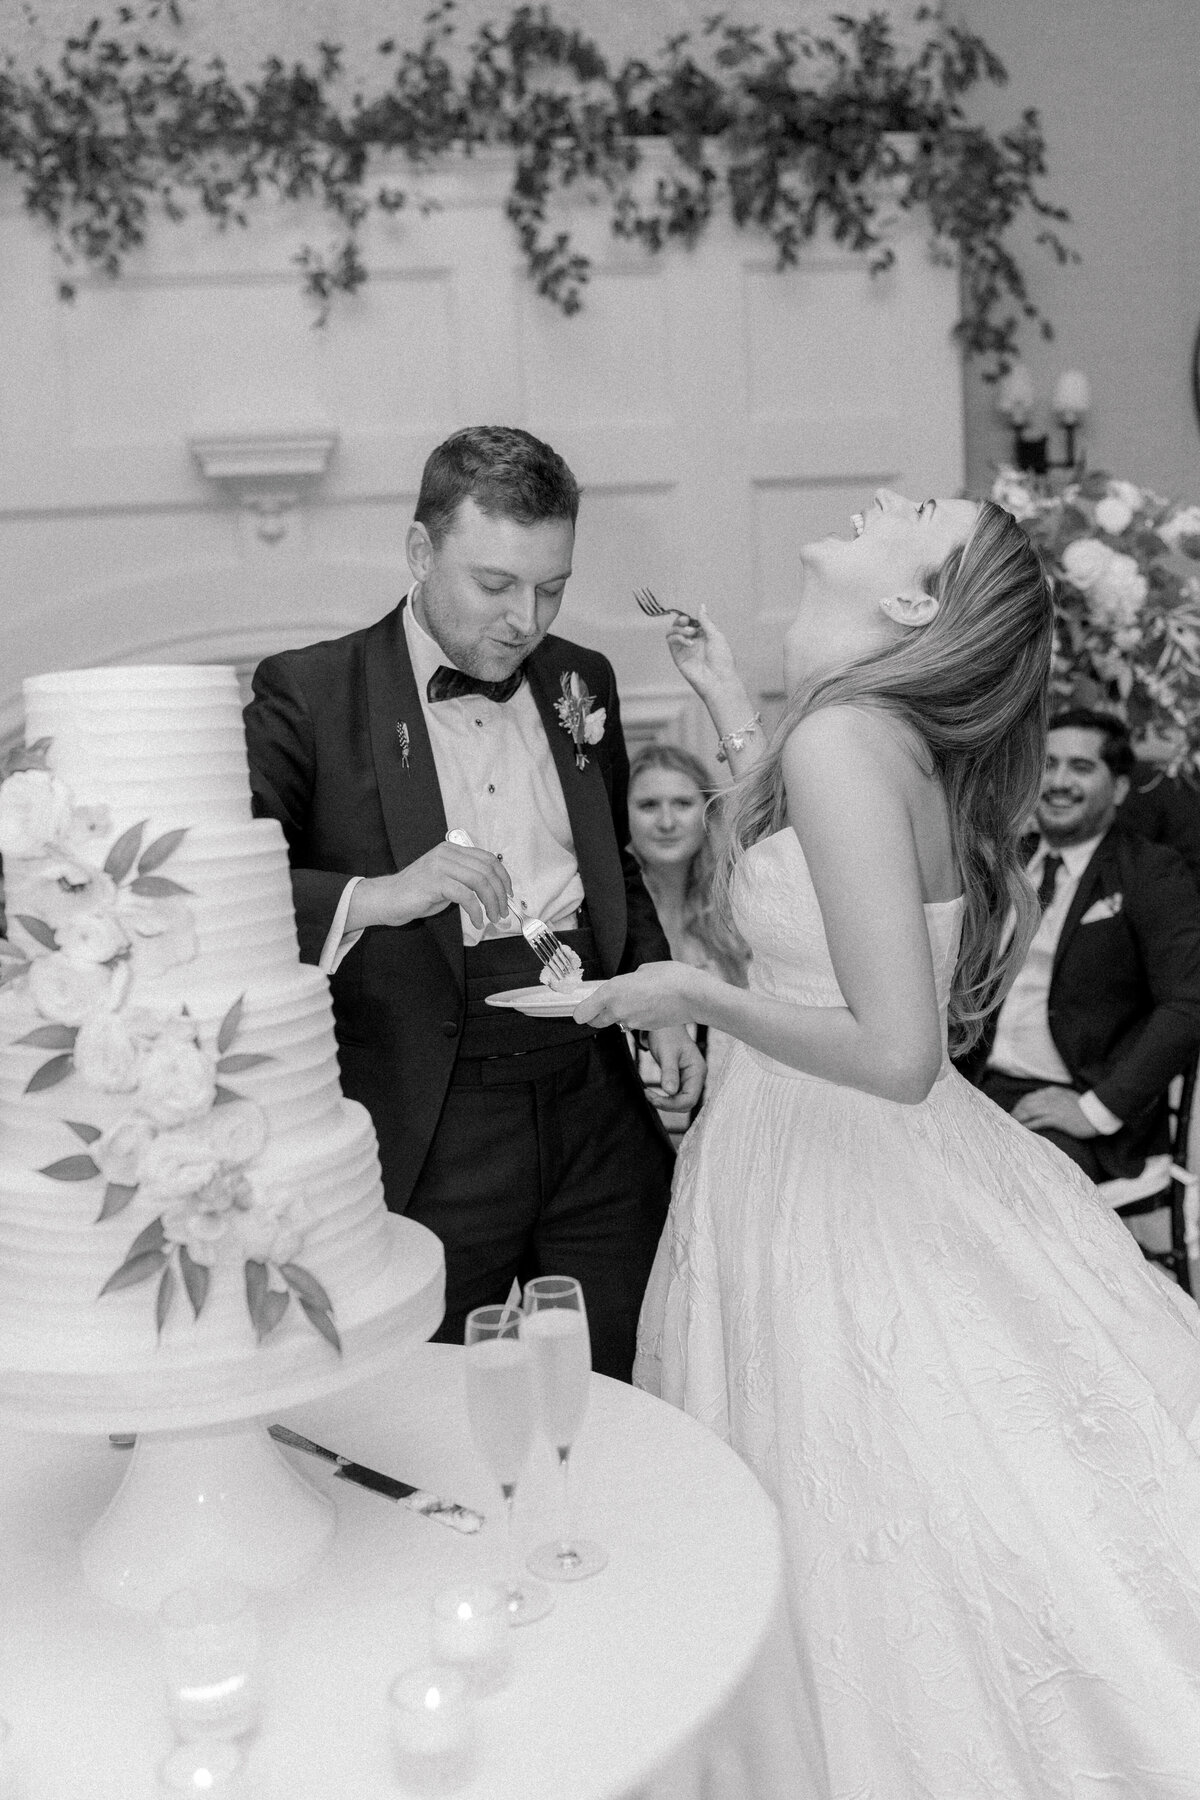 Bride laughs after groom feeds her a piece of cake. Fun and sentimental black and white wedding day photos. Kailee DiMeglio Photography. Kiawah River Course wedding.